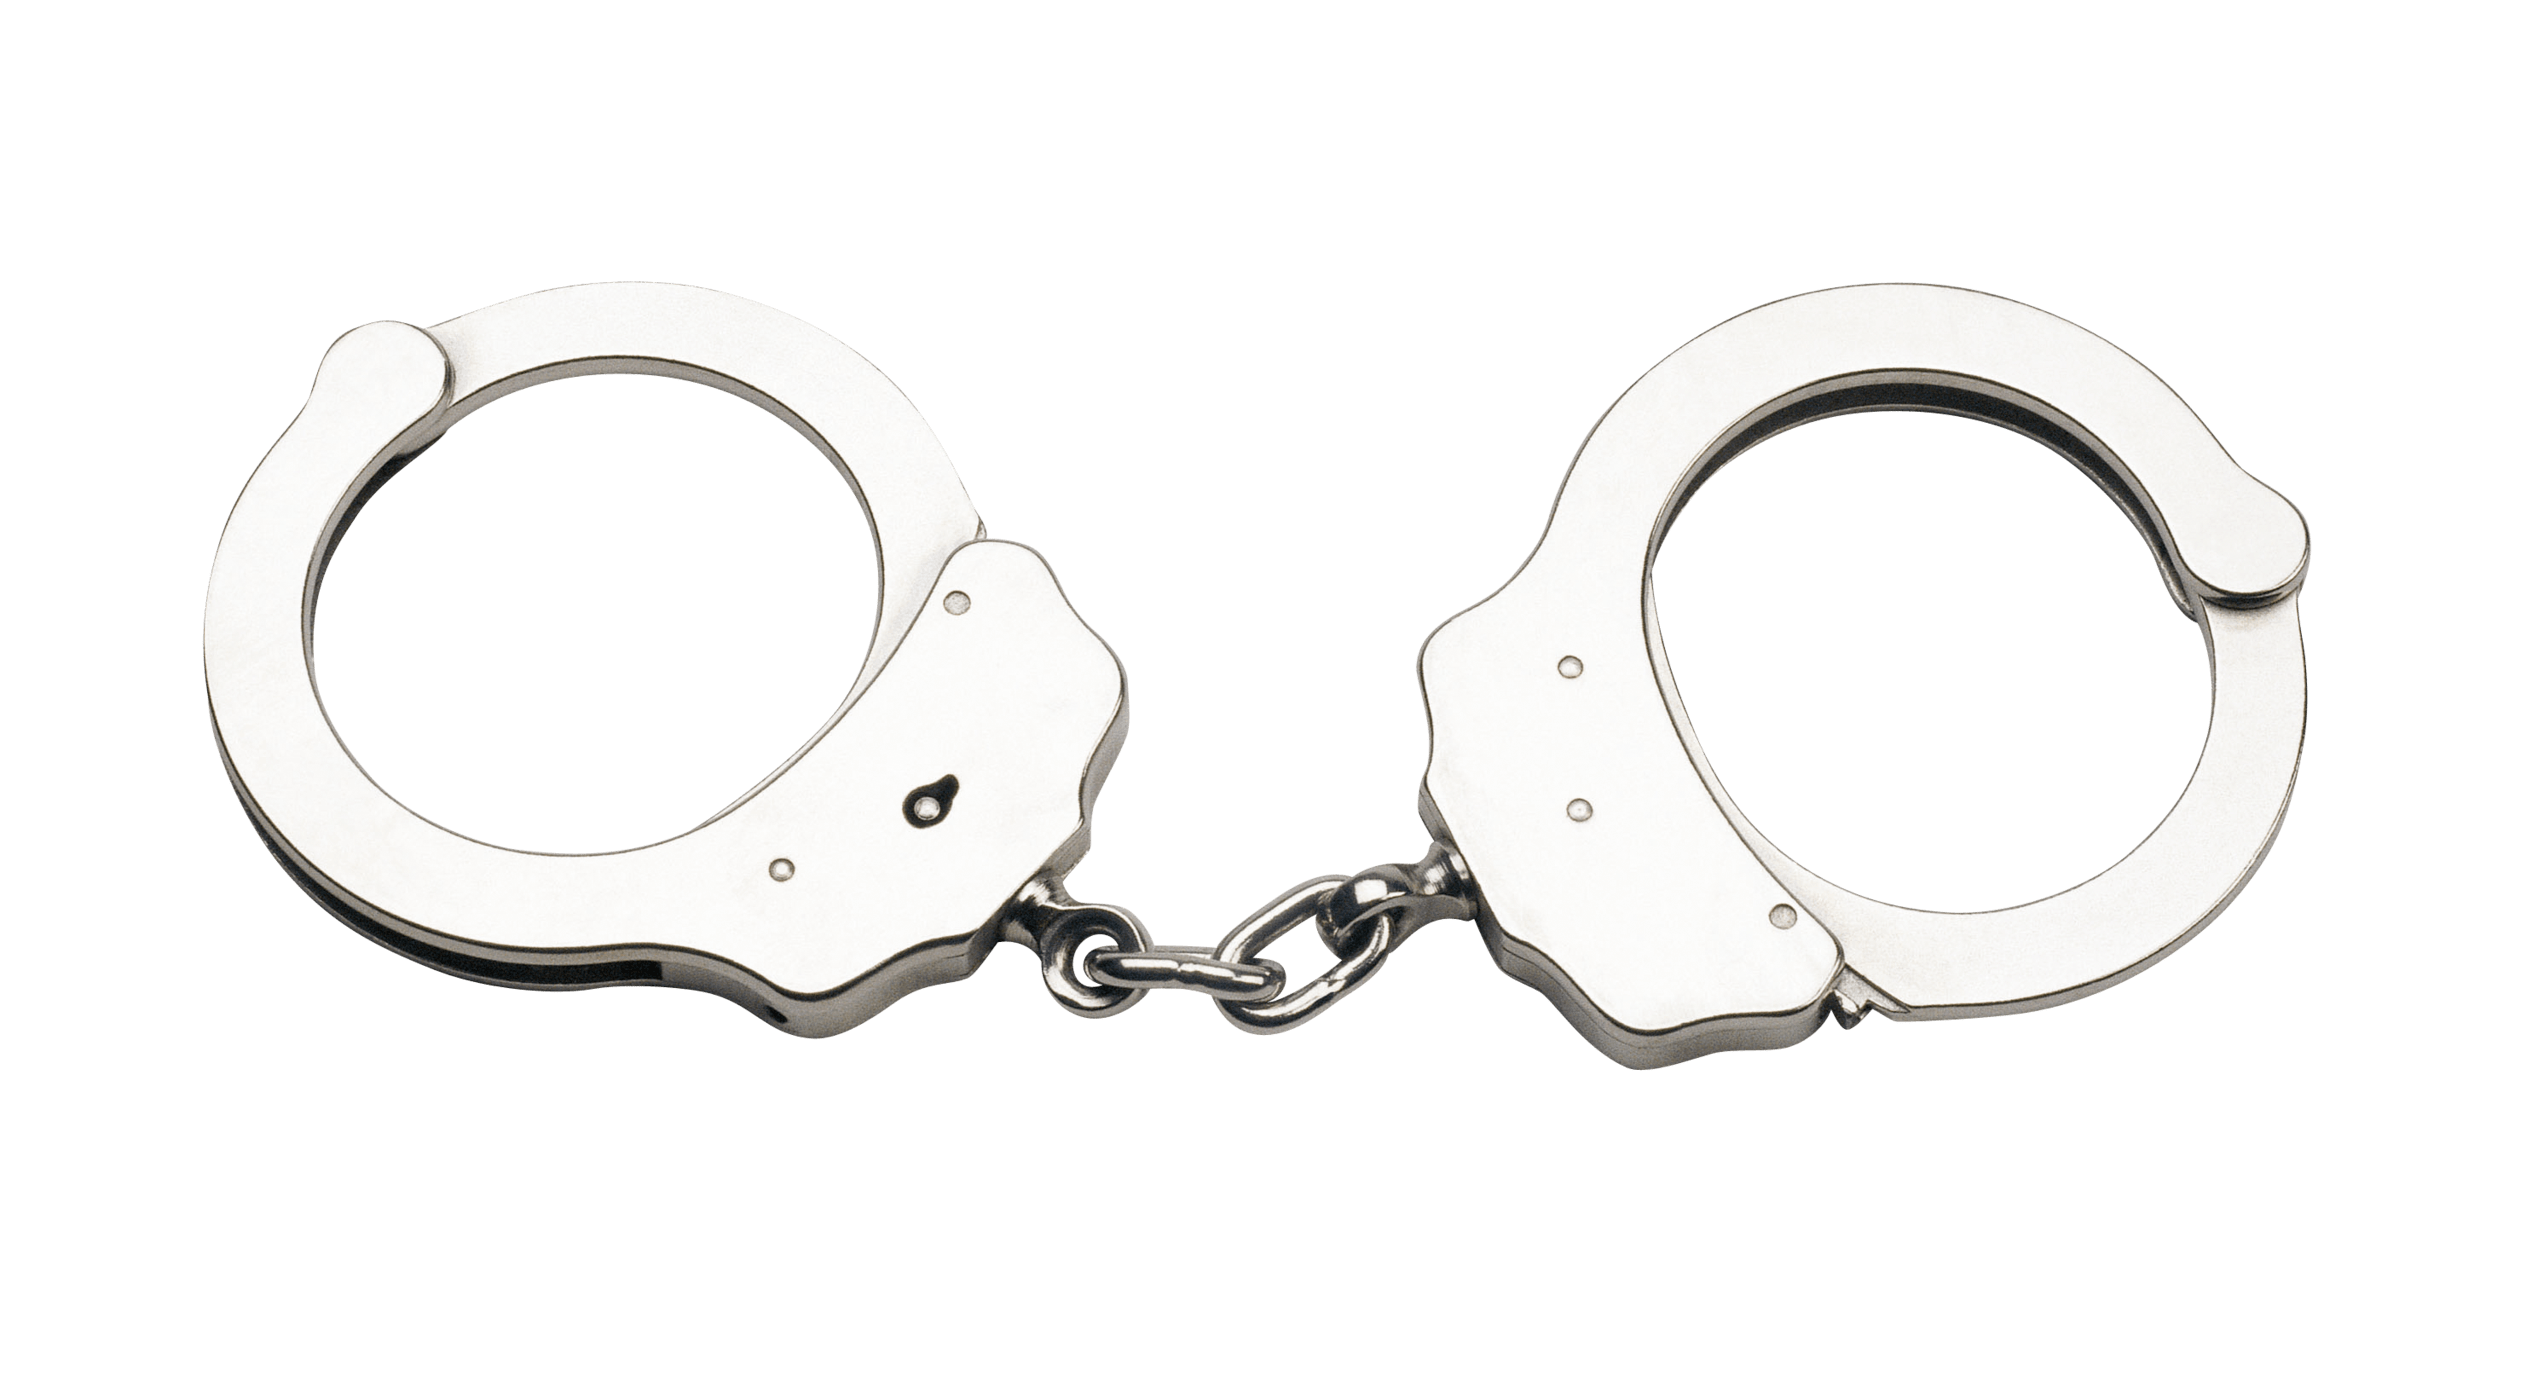 Handcuff clipart thing. Handcuffs open transparent png